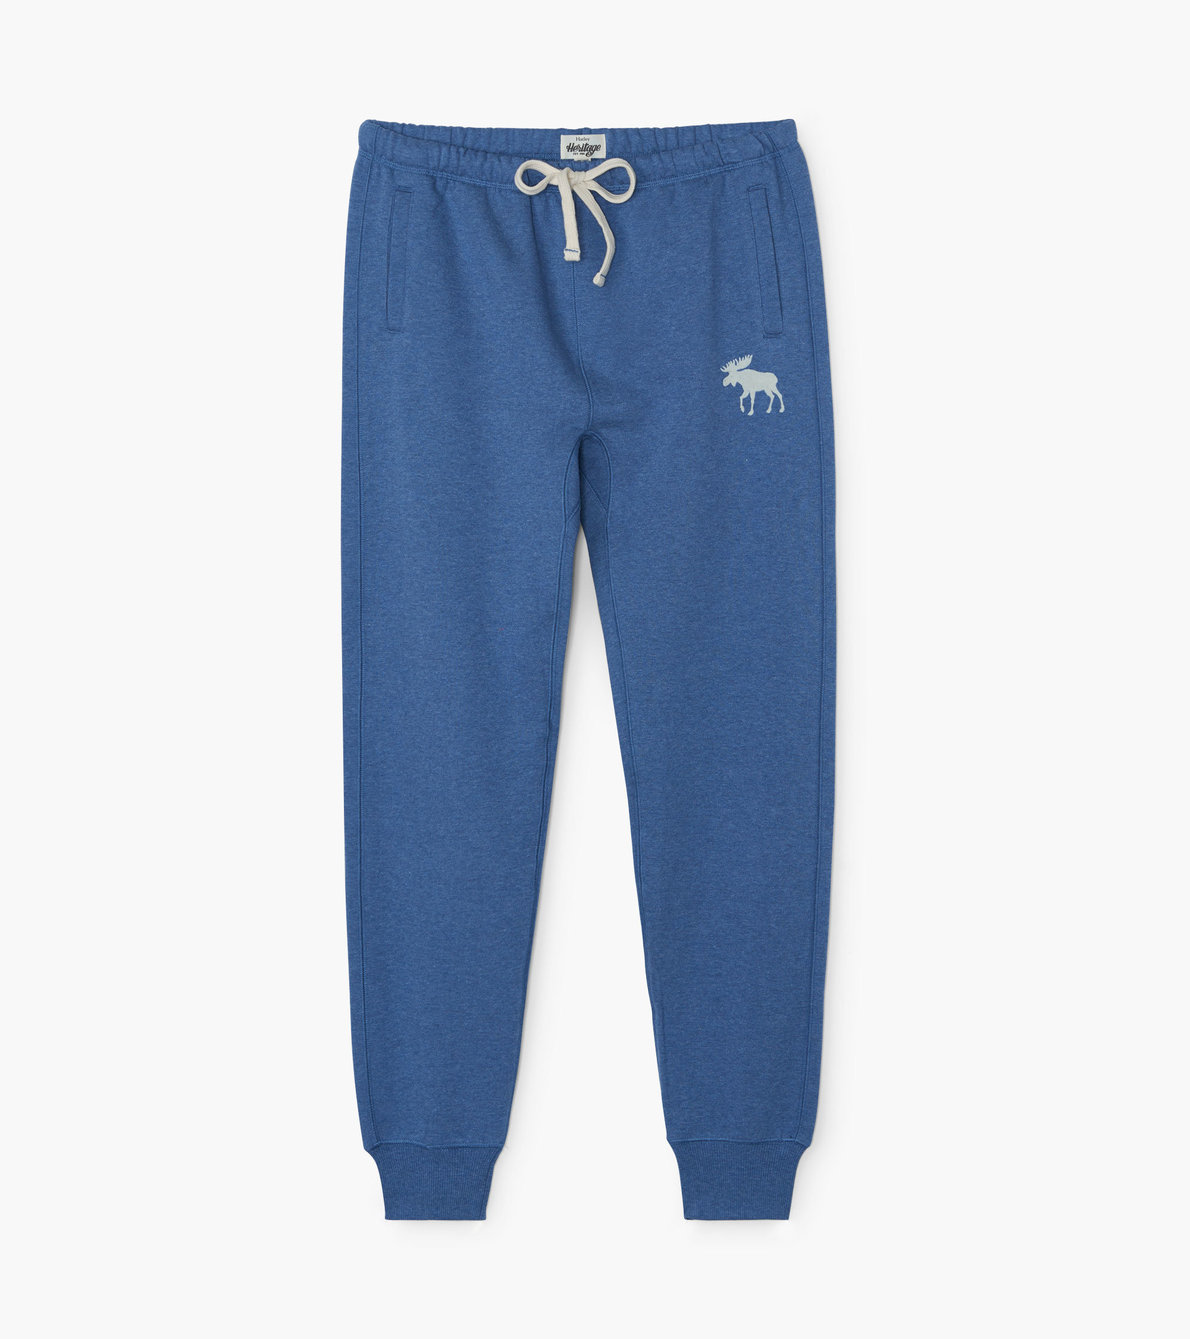 View larger image of Navy Moose Women's Heritage Joggers